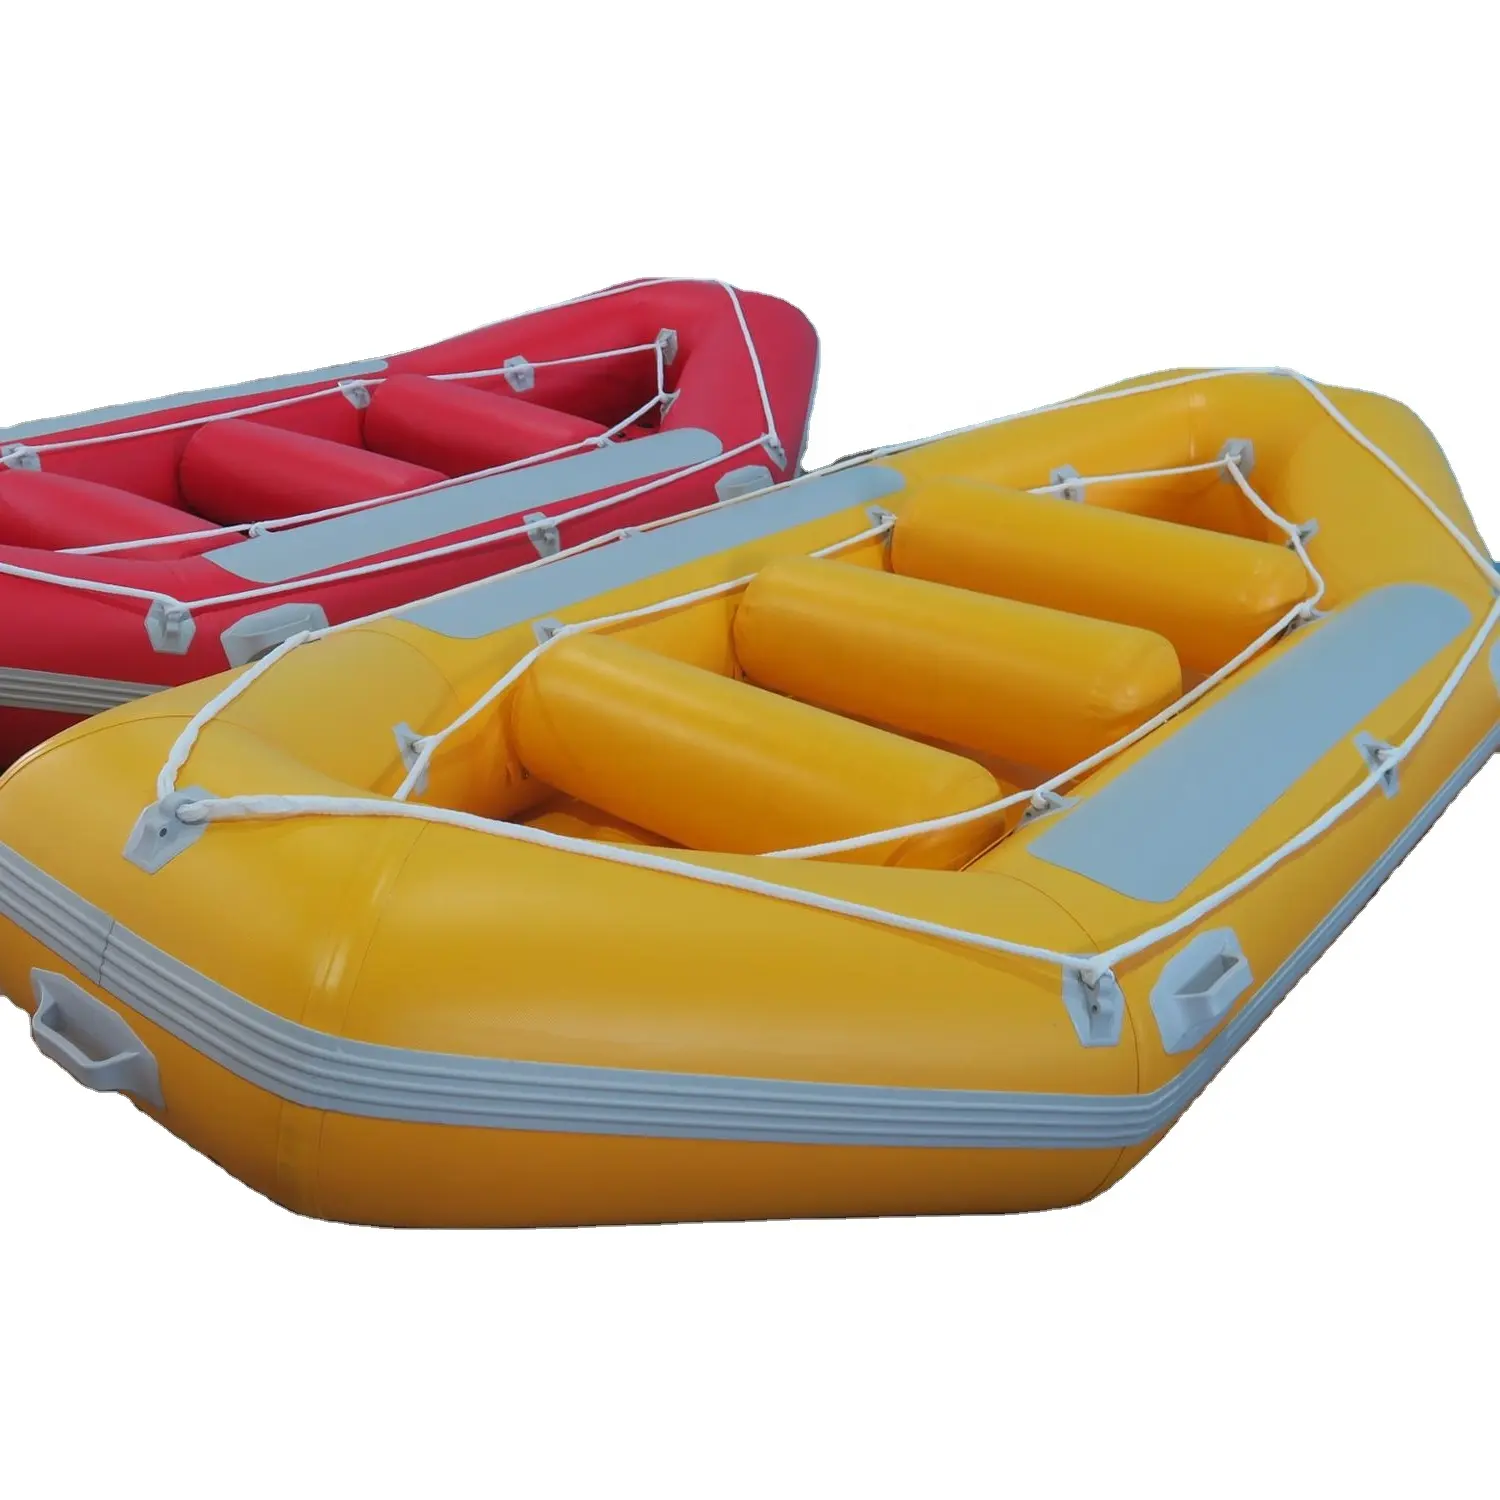 MANUFACTURER RAFTING BOATS most popular sell inflatable rafting boat for fishing surfing